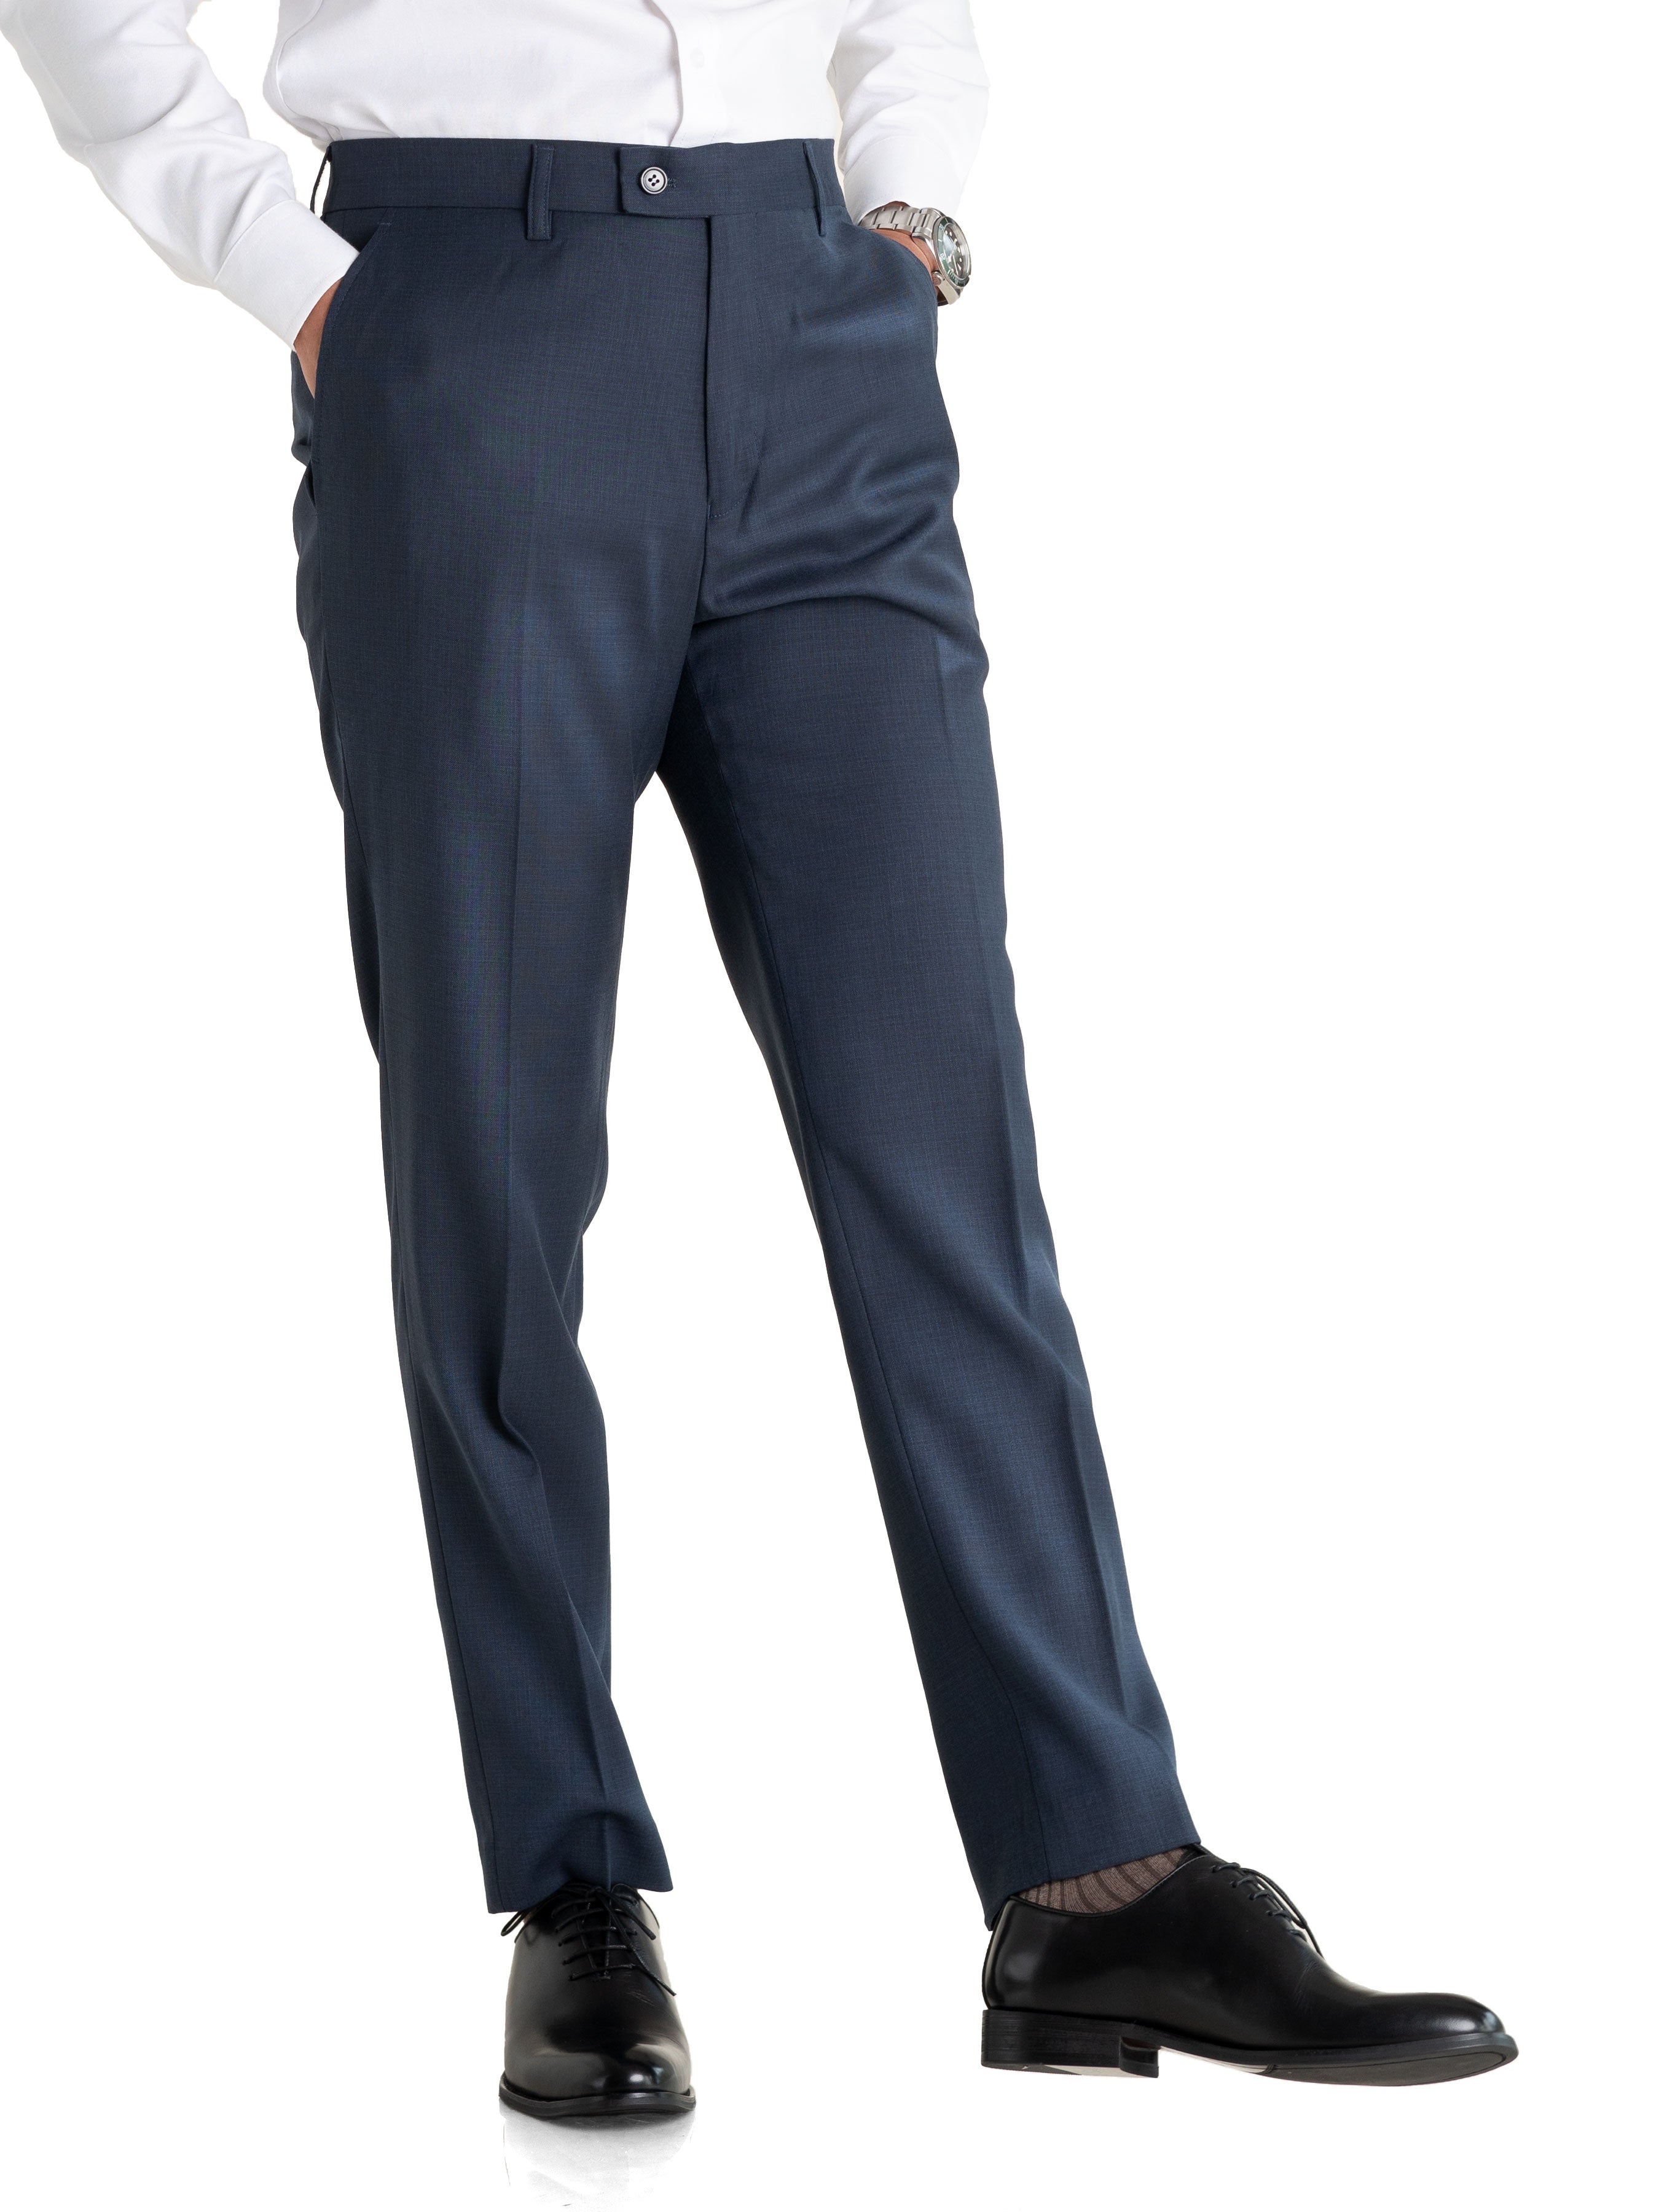 Trousers With Belt Loop - Yankees Blue (Stretchable) - Zeve Shoes